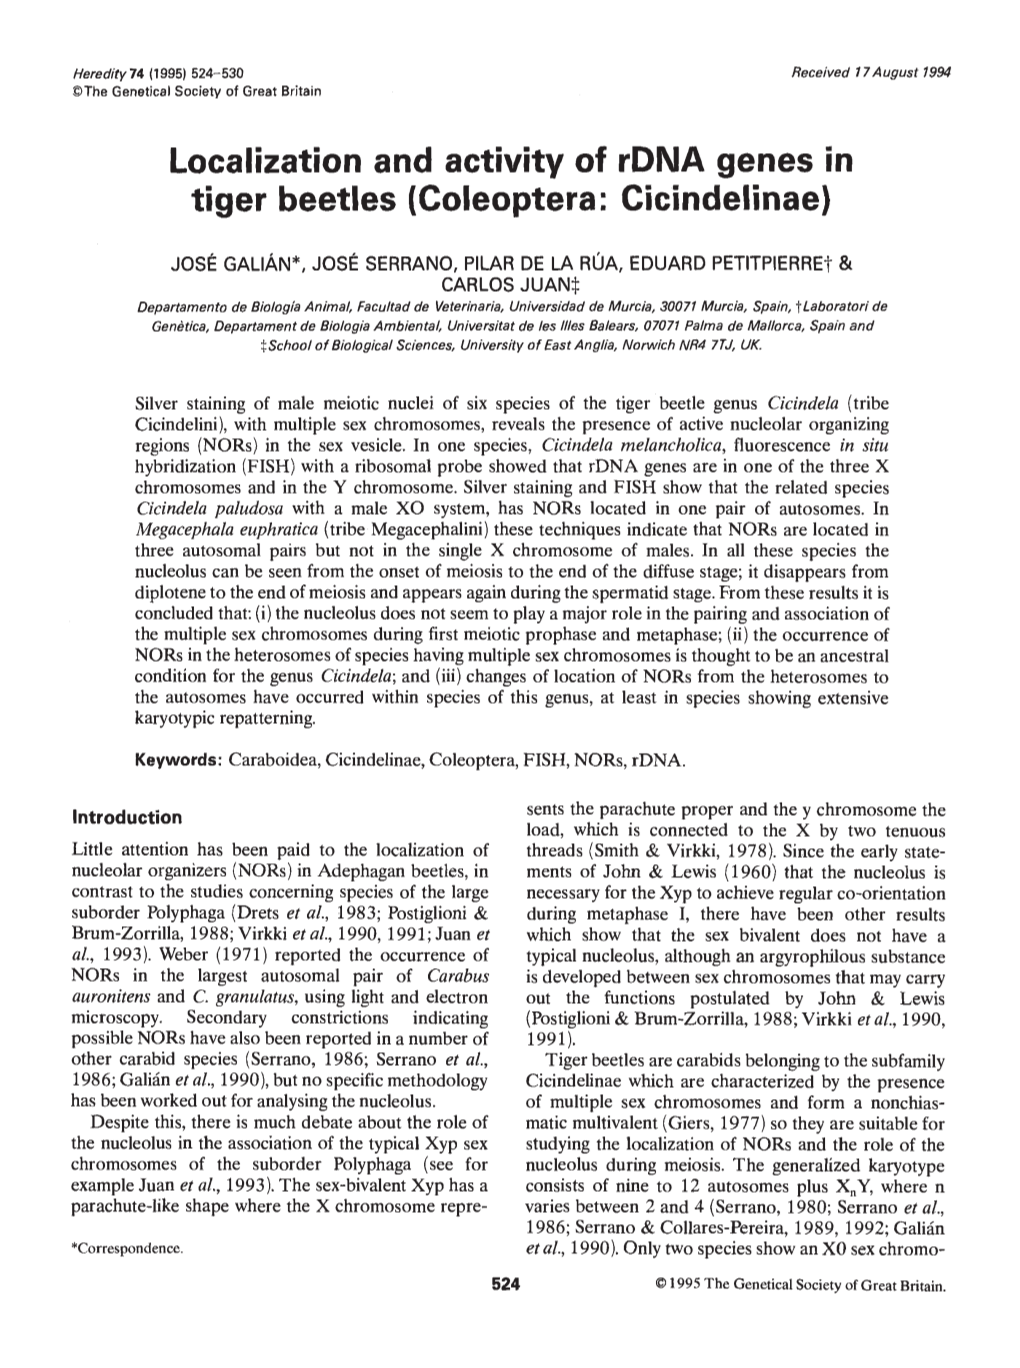 Localization and Activity of Rdna Genes in Tiger Beetles (Coleoptera: Cicindelinae)